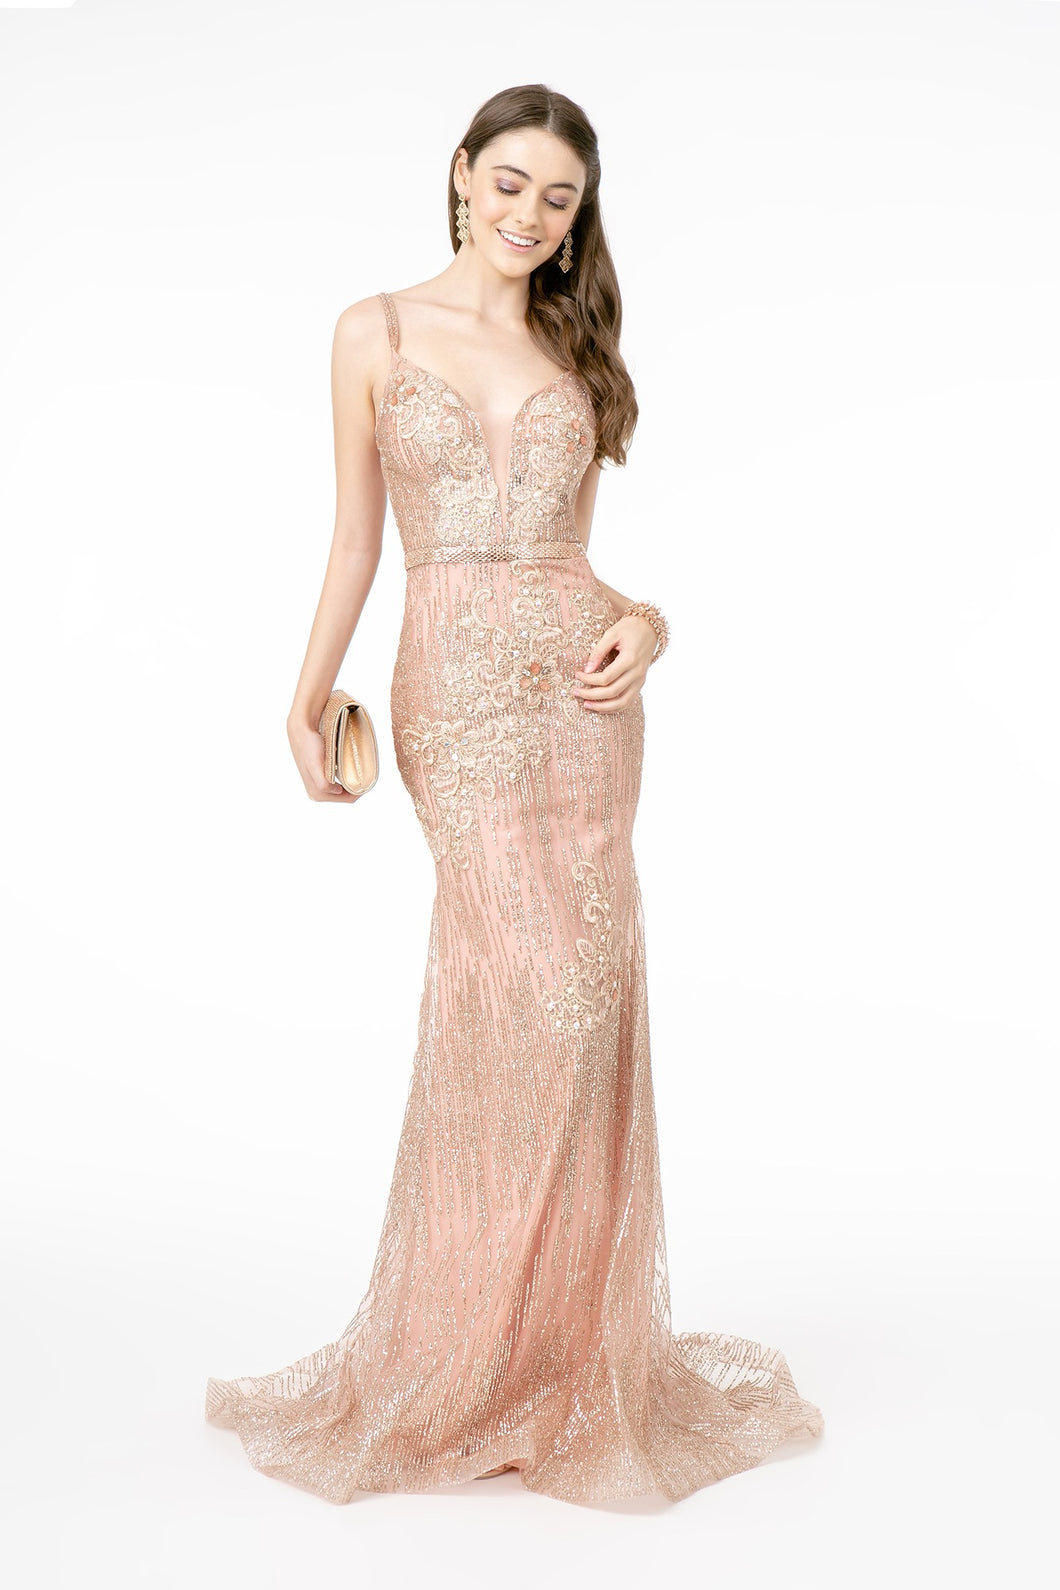 GL 2889 - Floral Embroidered Fit & Flare Prom Gown with Glitter Sequin & Jeweled Waistband Prom Dress GLS XS ROSE GOLD 